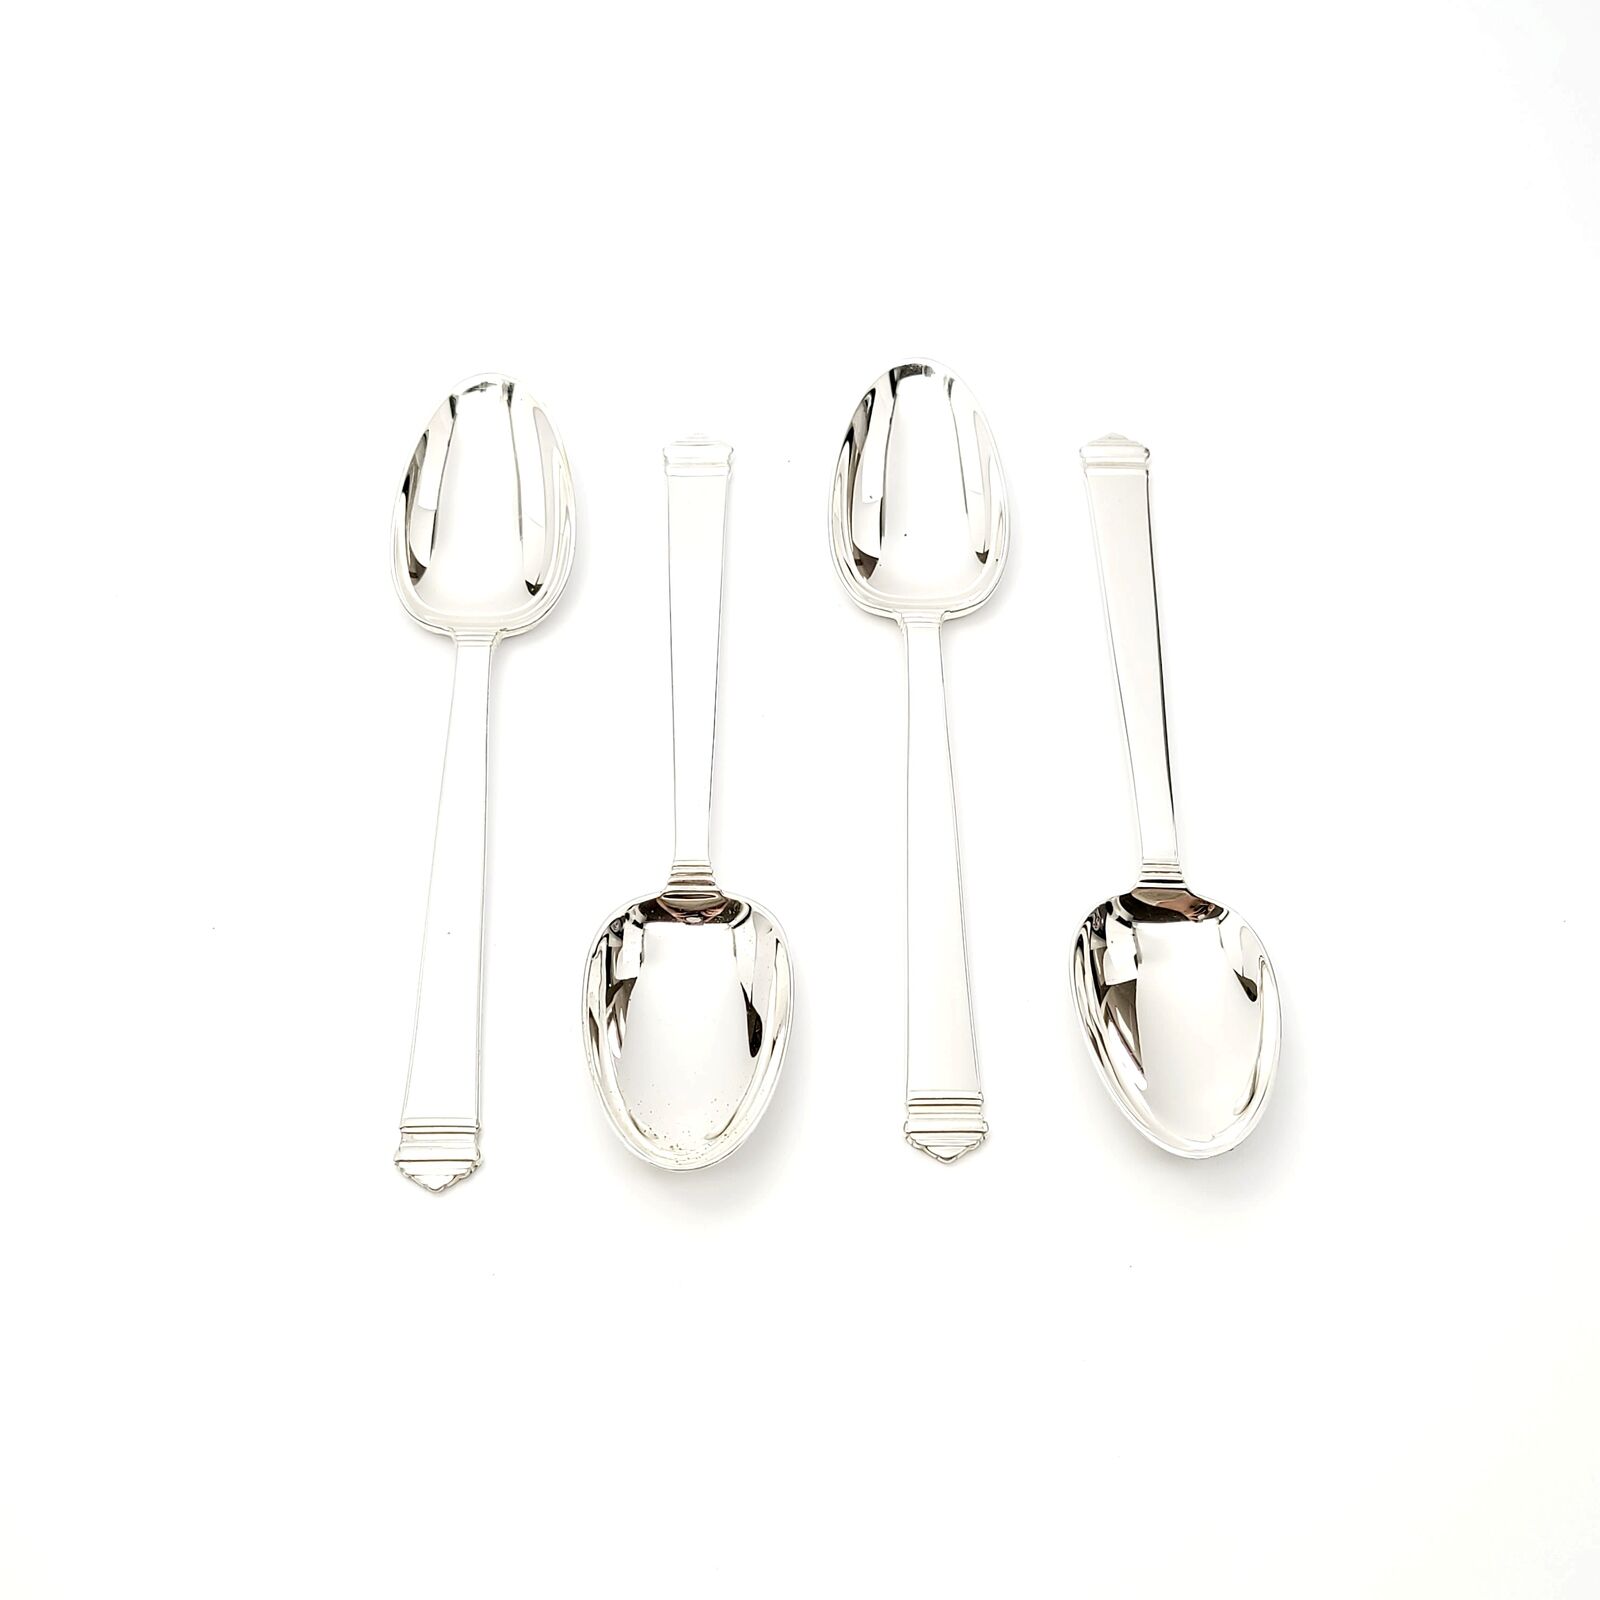 Set of 4 Tiffany & Co Windham Sterling Silver Teaspoons #8623